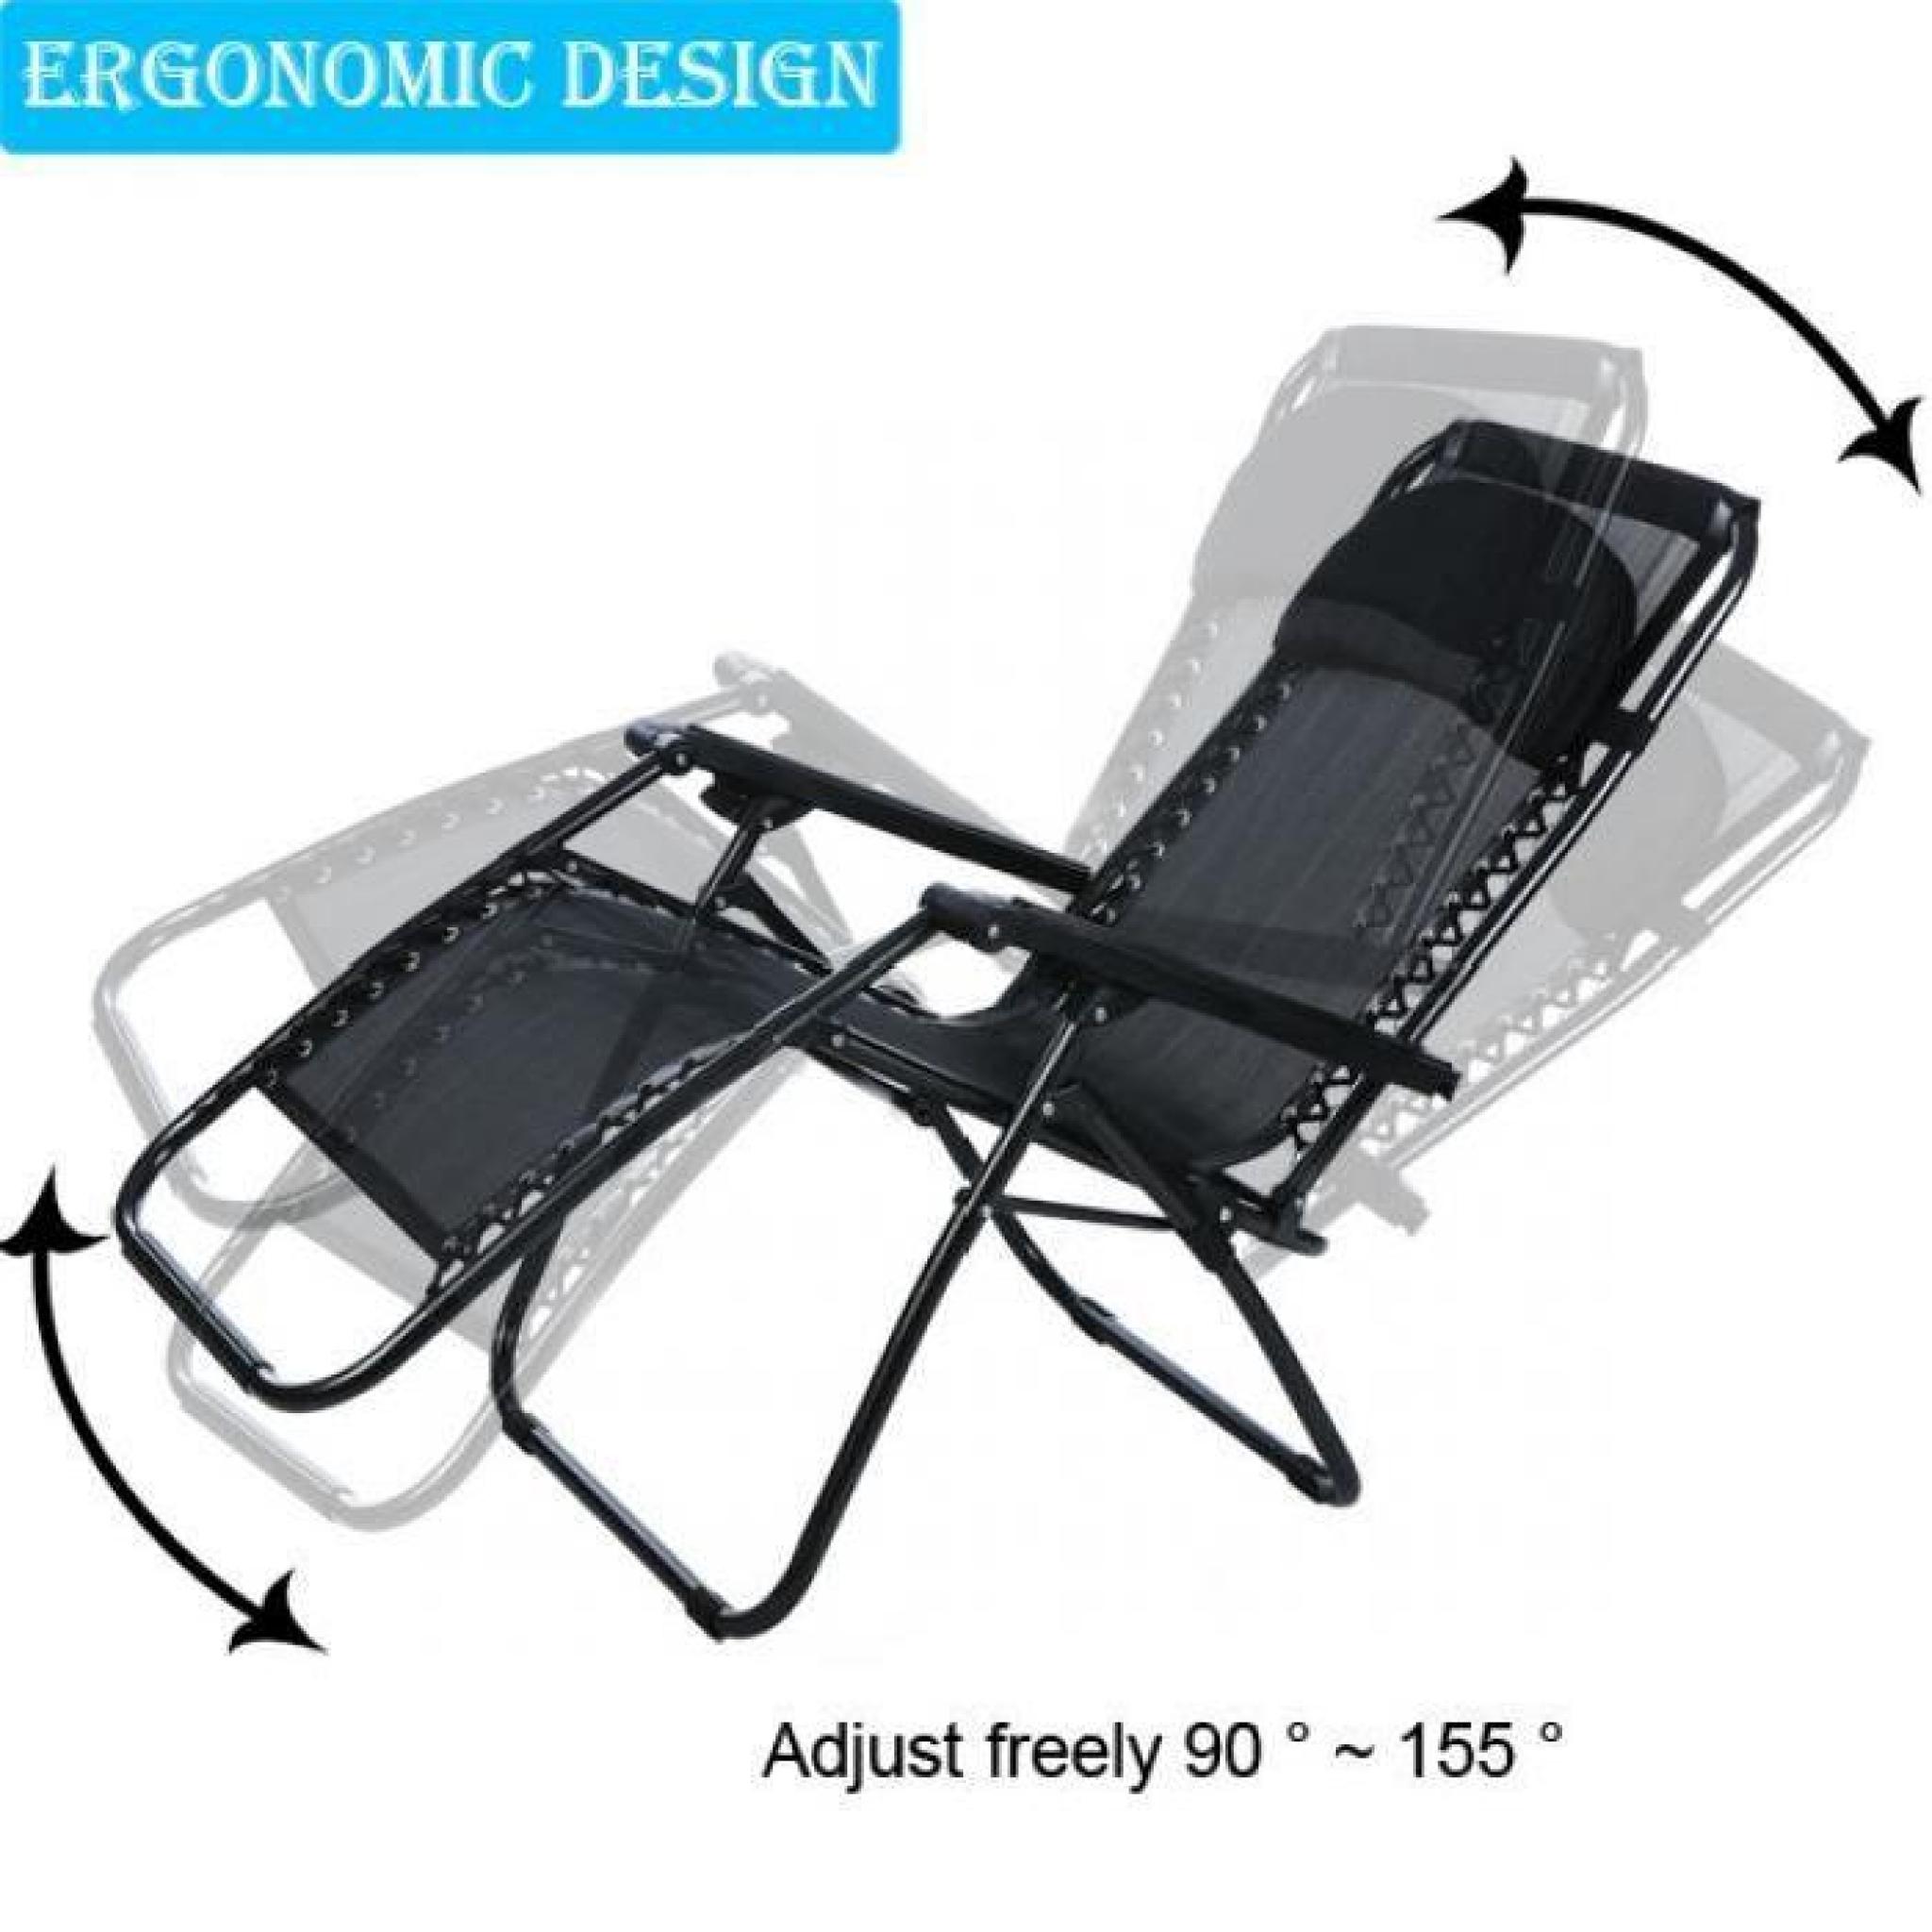 HOMDOX chaise pliant chaise longue inclinable salon Portable jardin Camping chaise  pas cher